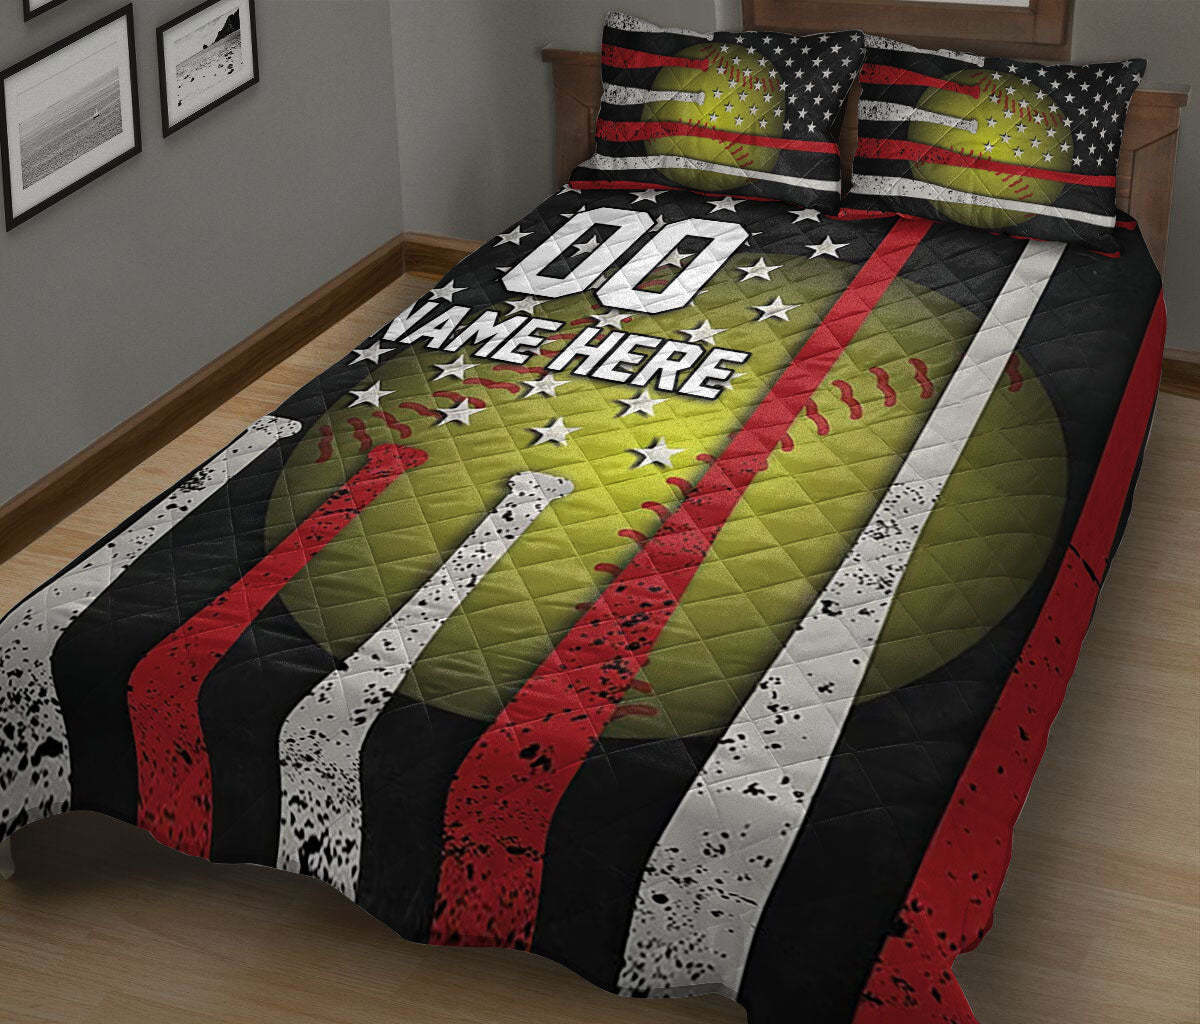 Ohaprints-Quilt-Bed-Set-Pillowcase-Softball-Ball-American-Flag-Custom-Personalized-Name-Number-Blanket-Bedspread-Bedding-1263-King (90'' x 100'')